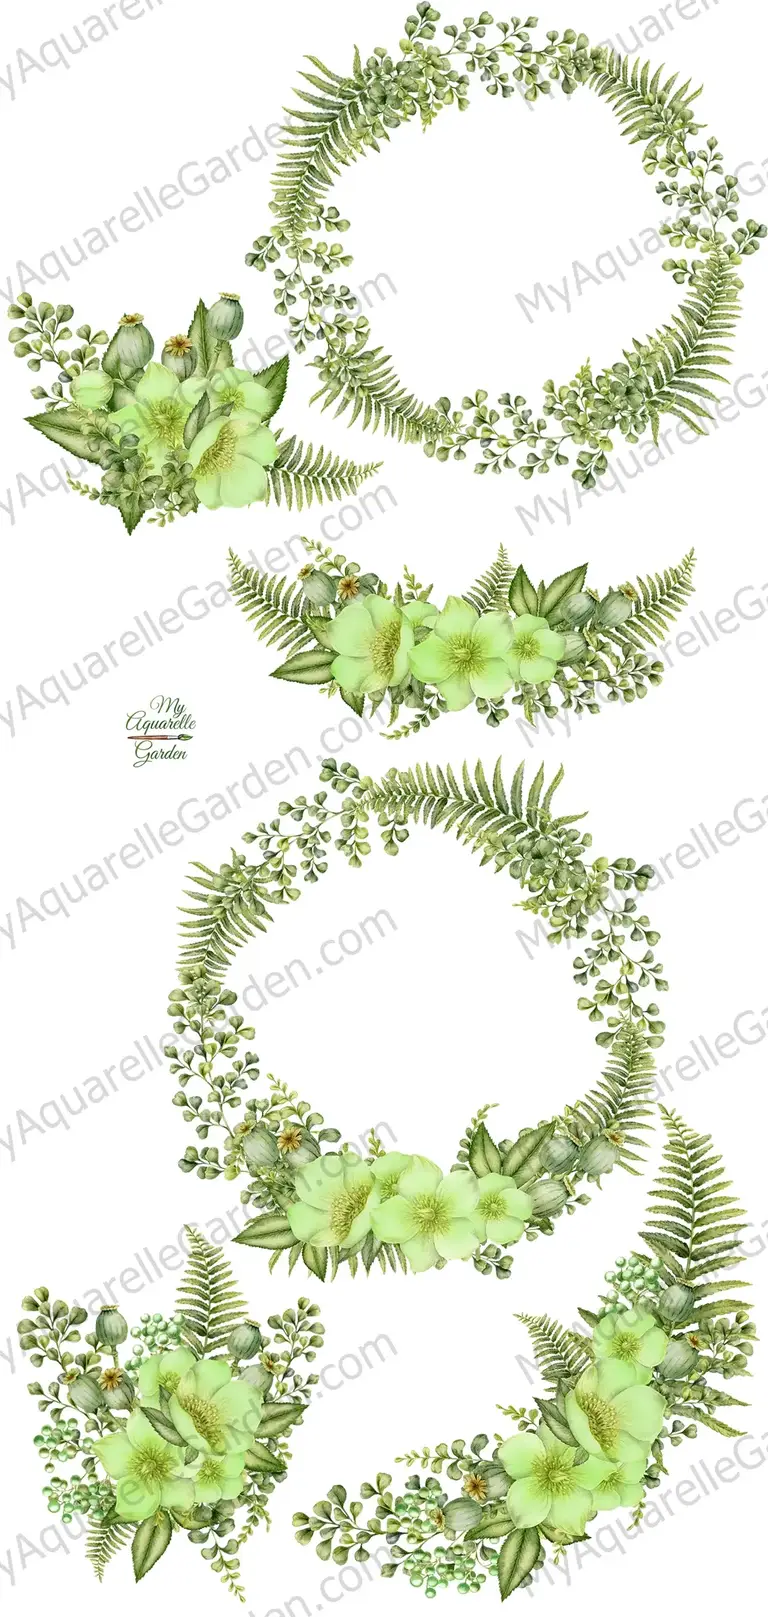 Greenery wreaths. Watercolor hand-painted illustrations by MyAquarelleGarden.